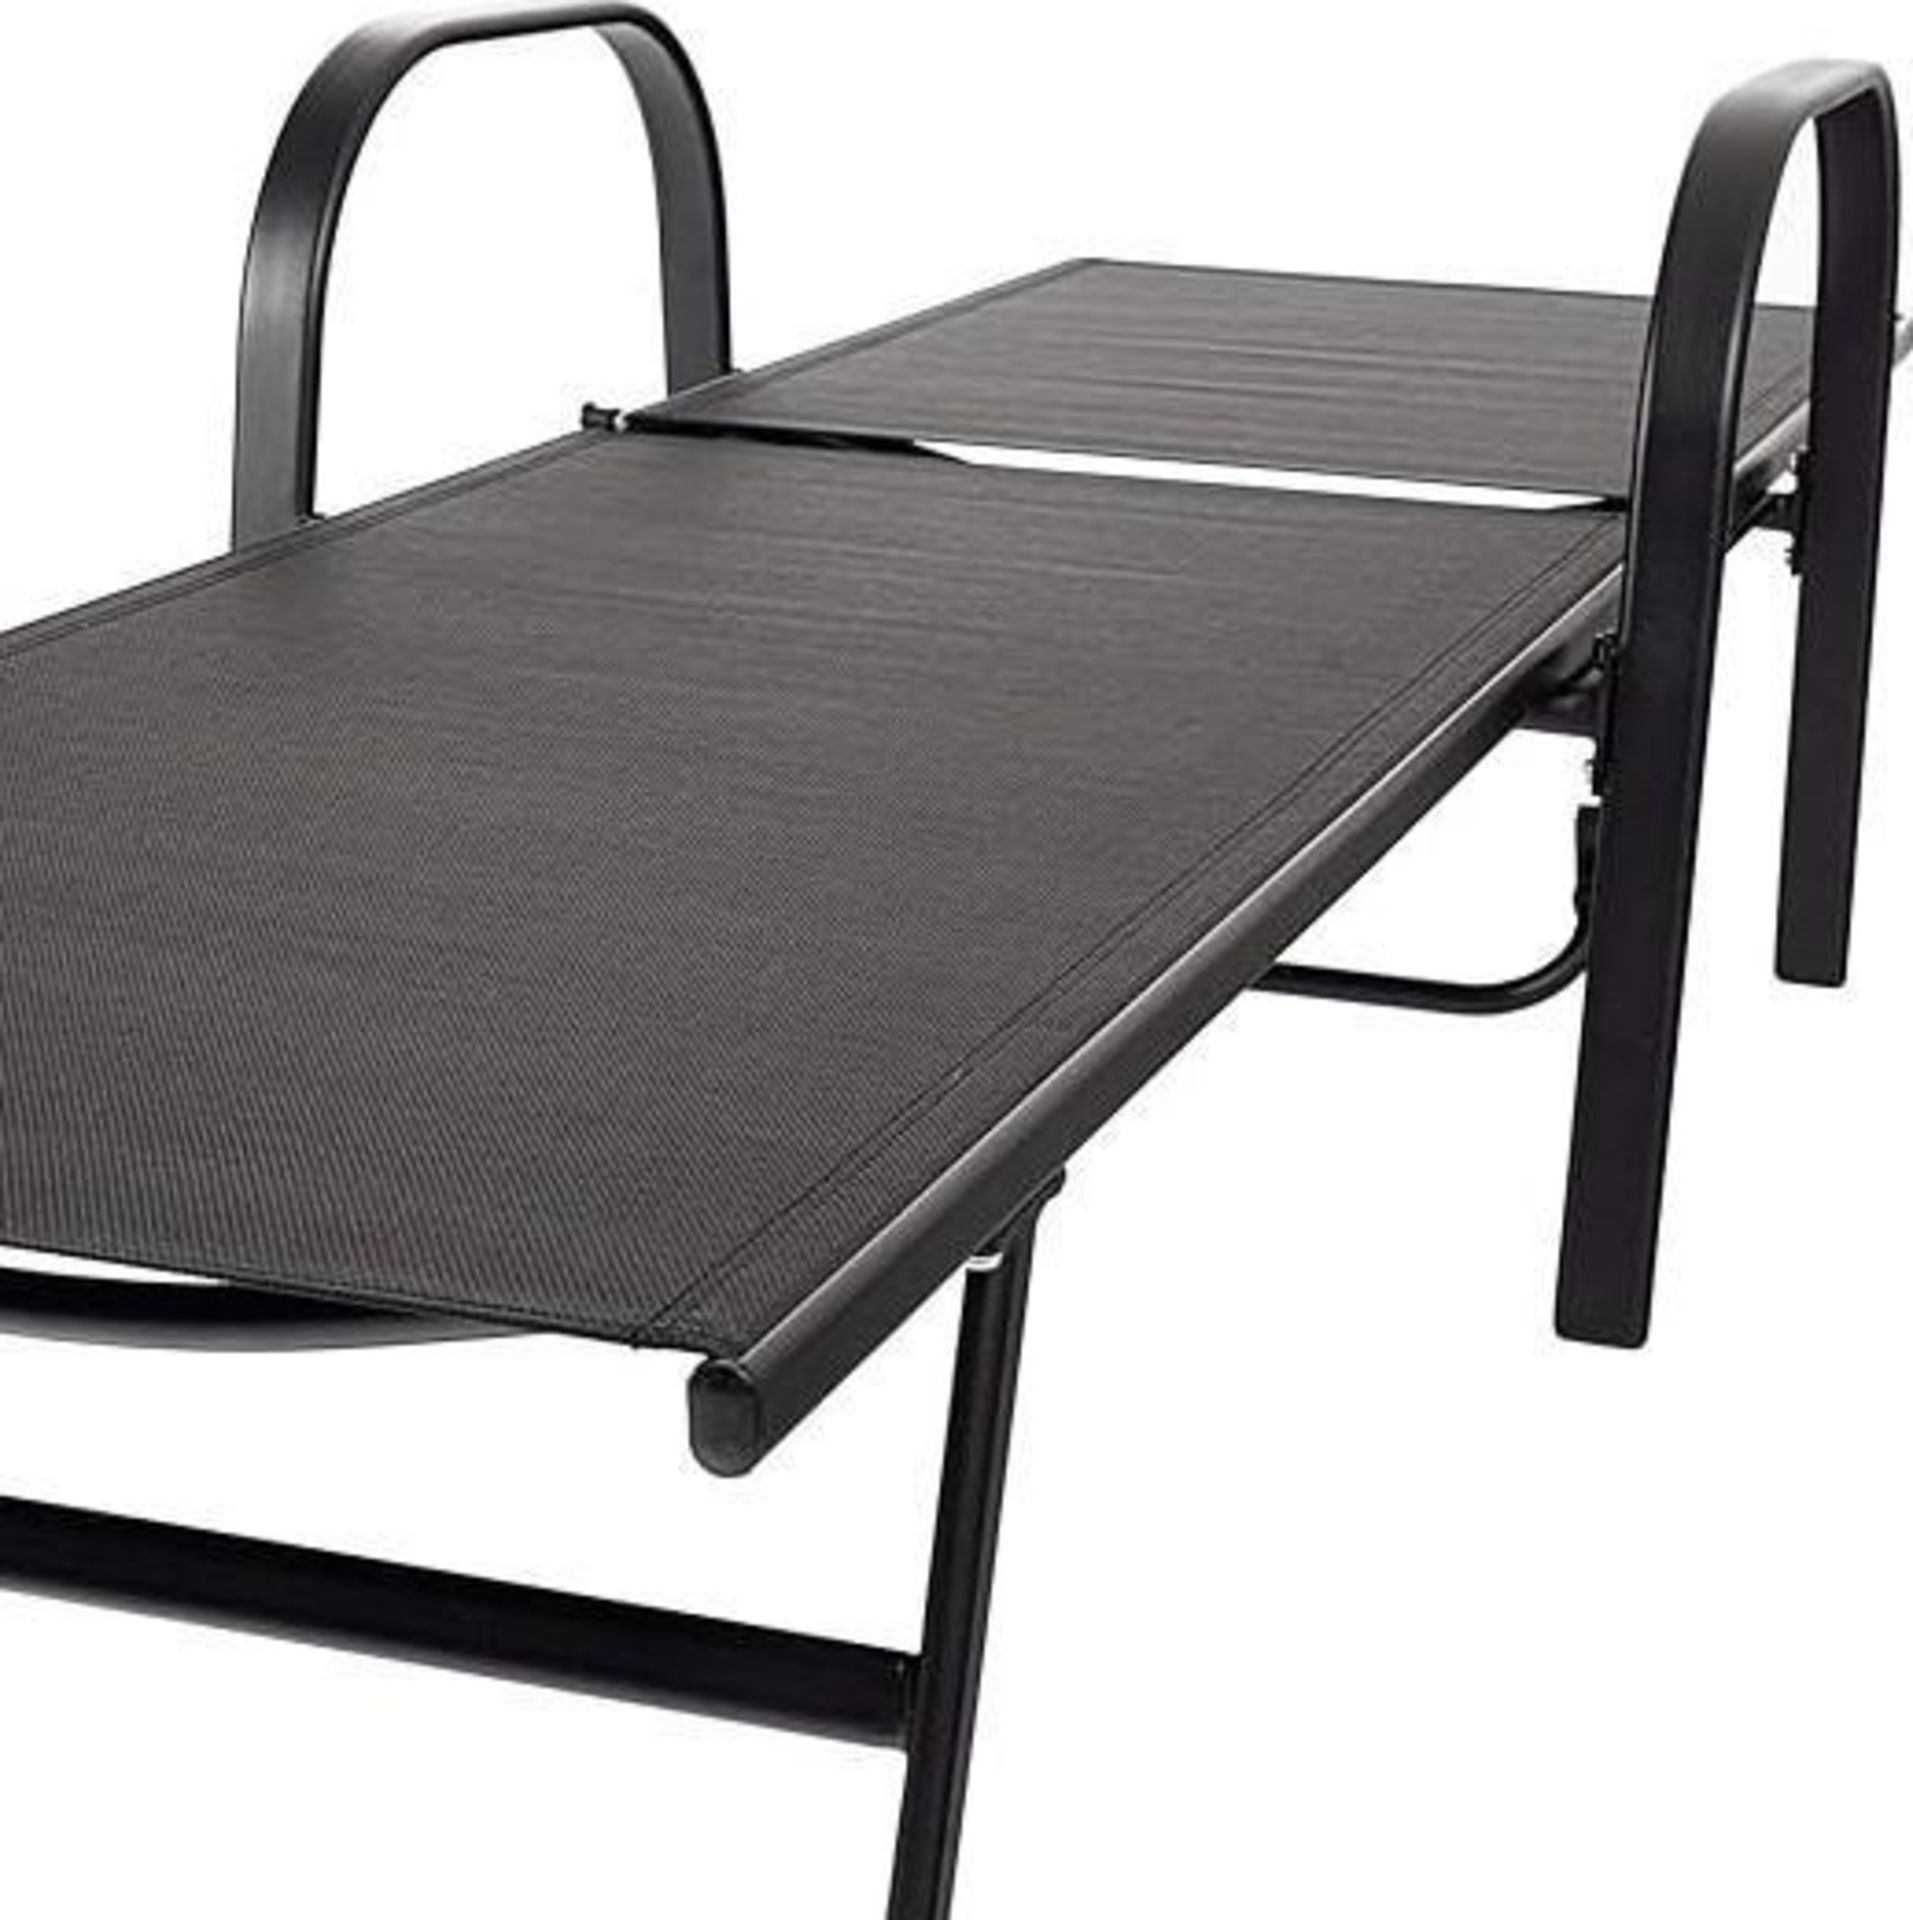 BRAND NEW & BOXED TRADE LOT - 2 X Adjustable Reclining Outdoor Patio Sun Lounger in Black - Image 7 of 7